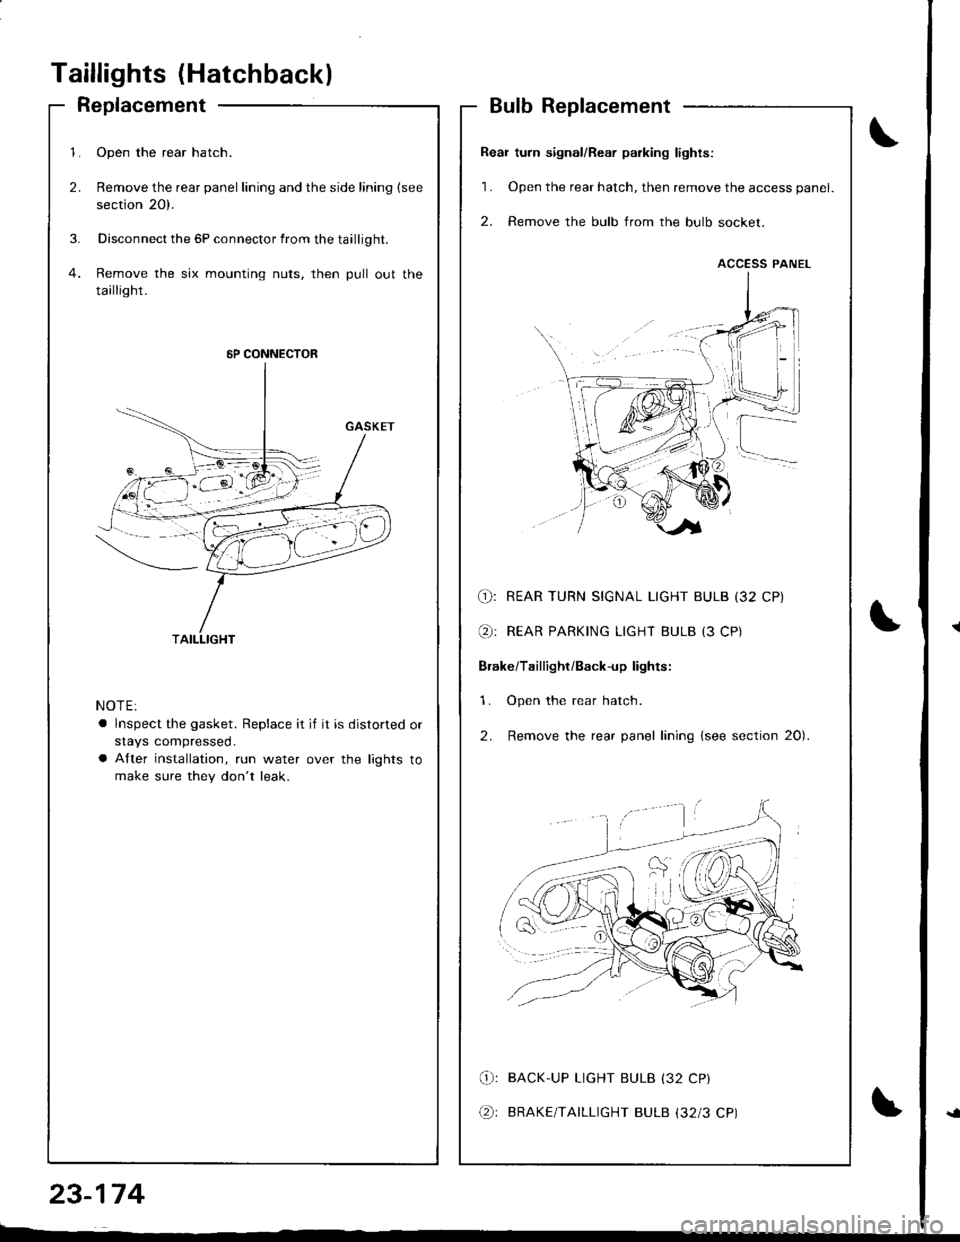 HONDA INTEGRA 1998 4.G Workshop Manual Taillights (Hatchback)
Replacement
1.
2.
Open the rear hatch.
Remove the rear panel lining and the side lining (see
section 20).
Disconnect the 5P connector from the taillight.
Remove the six mounting